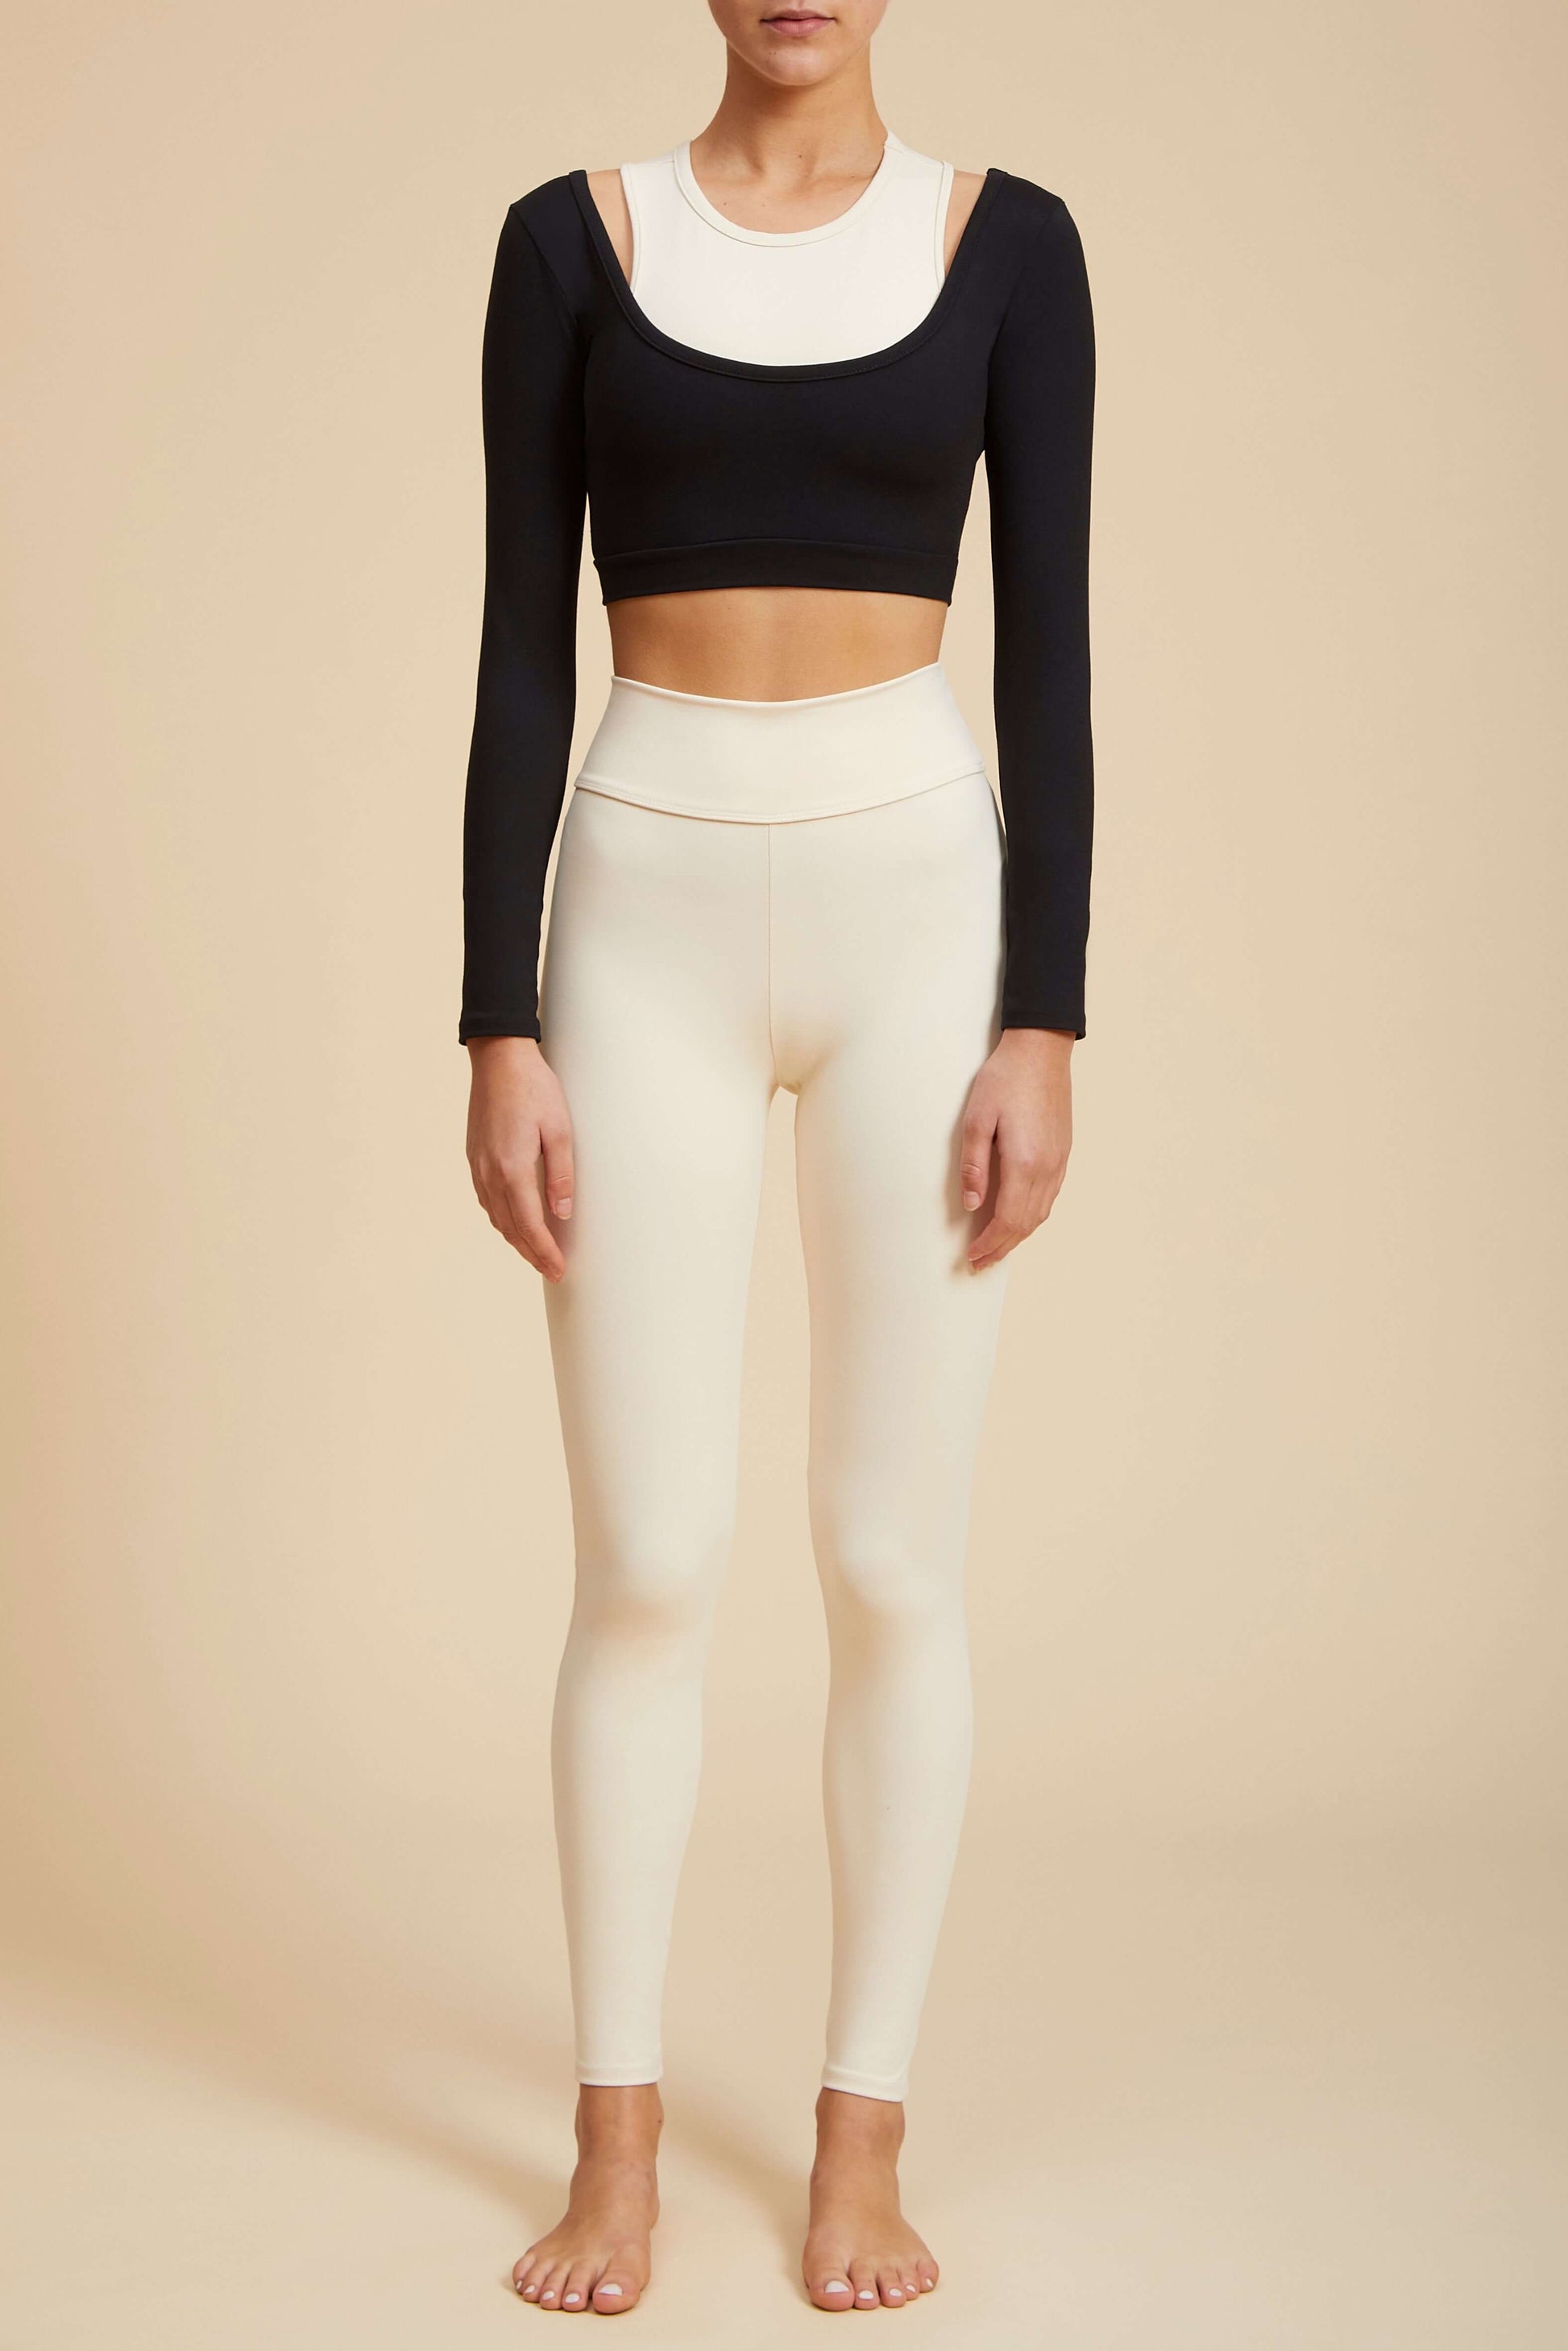 Live The Process Tuxedo Legging. Formal affair. A new spin on timeless tailoring: our bestselling Tuxedo Legging. A Live The Process staple from the start, this high waisted style features butt-sculpting seaming for extra long lean lines that work wonders